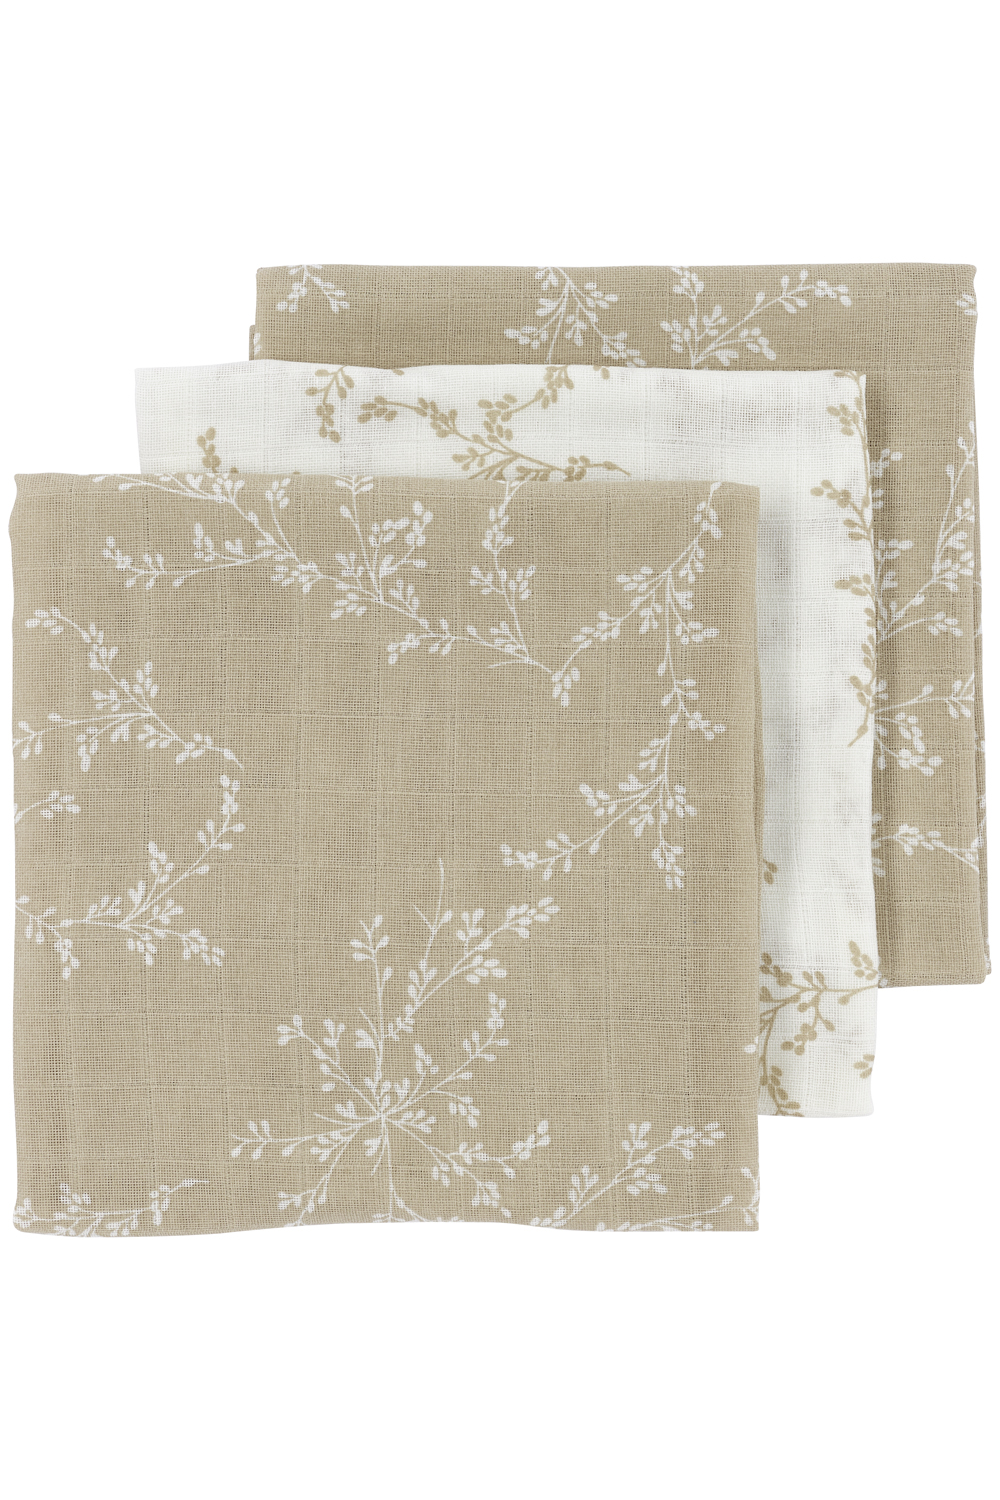 Muslin squares 3-pack Branches - sand - 70x70cm